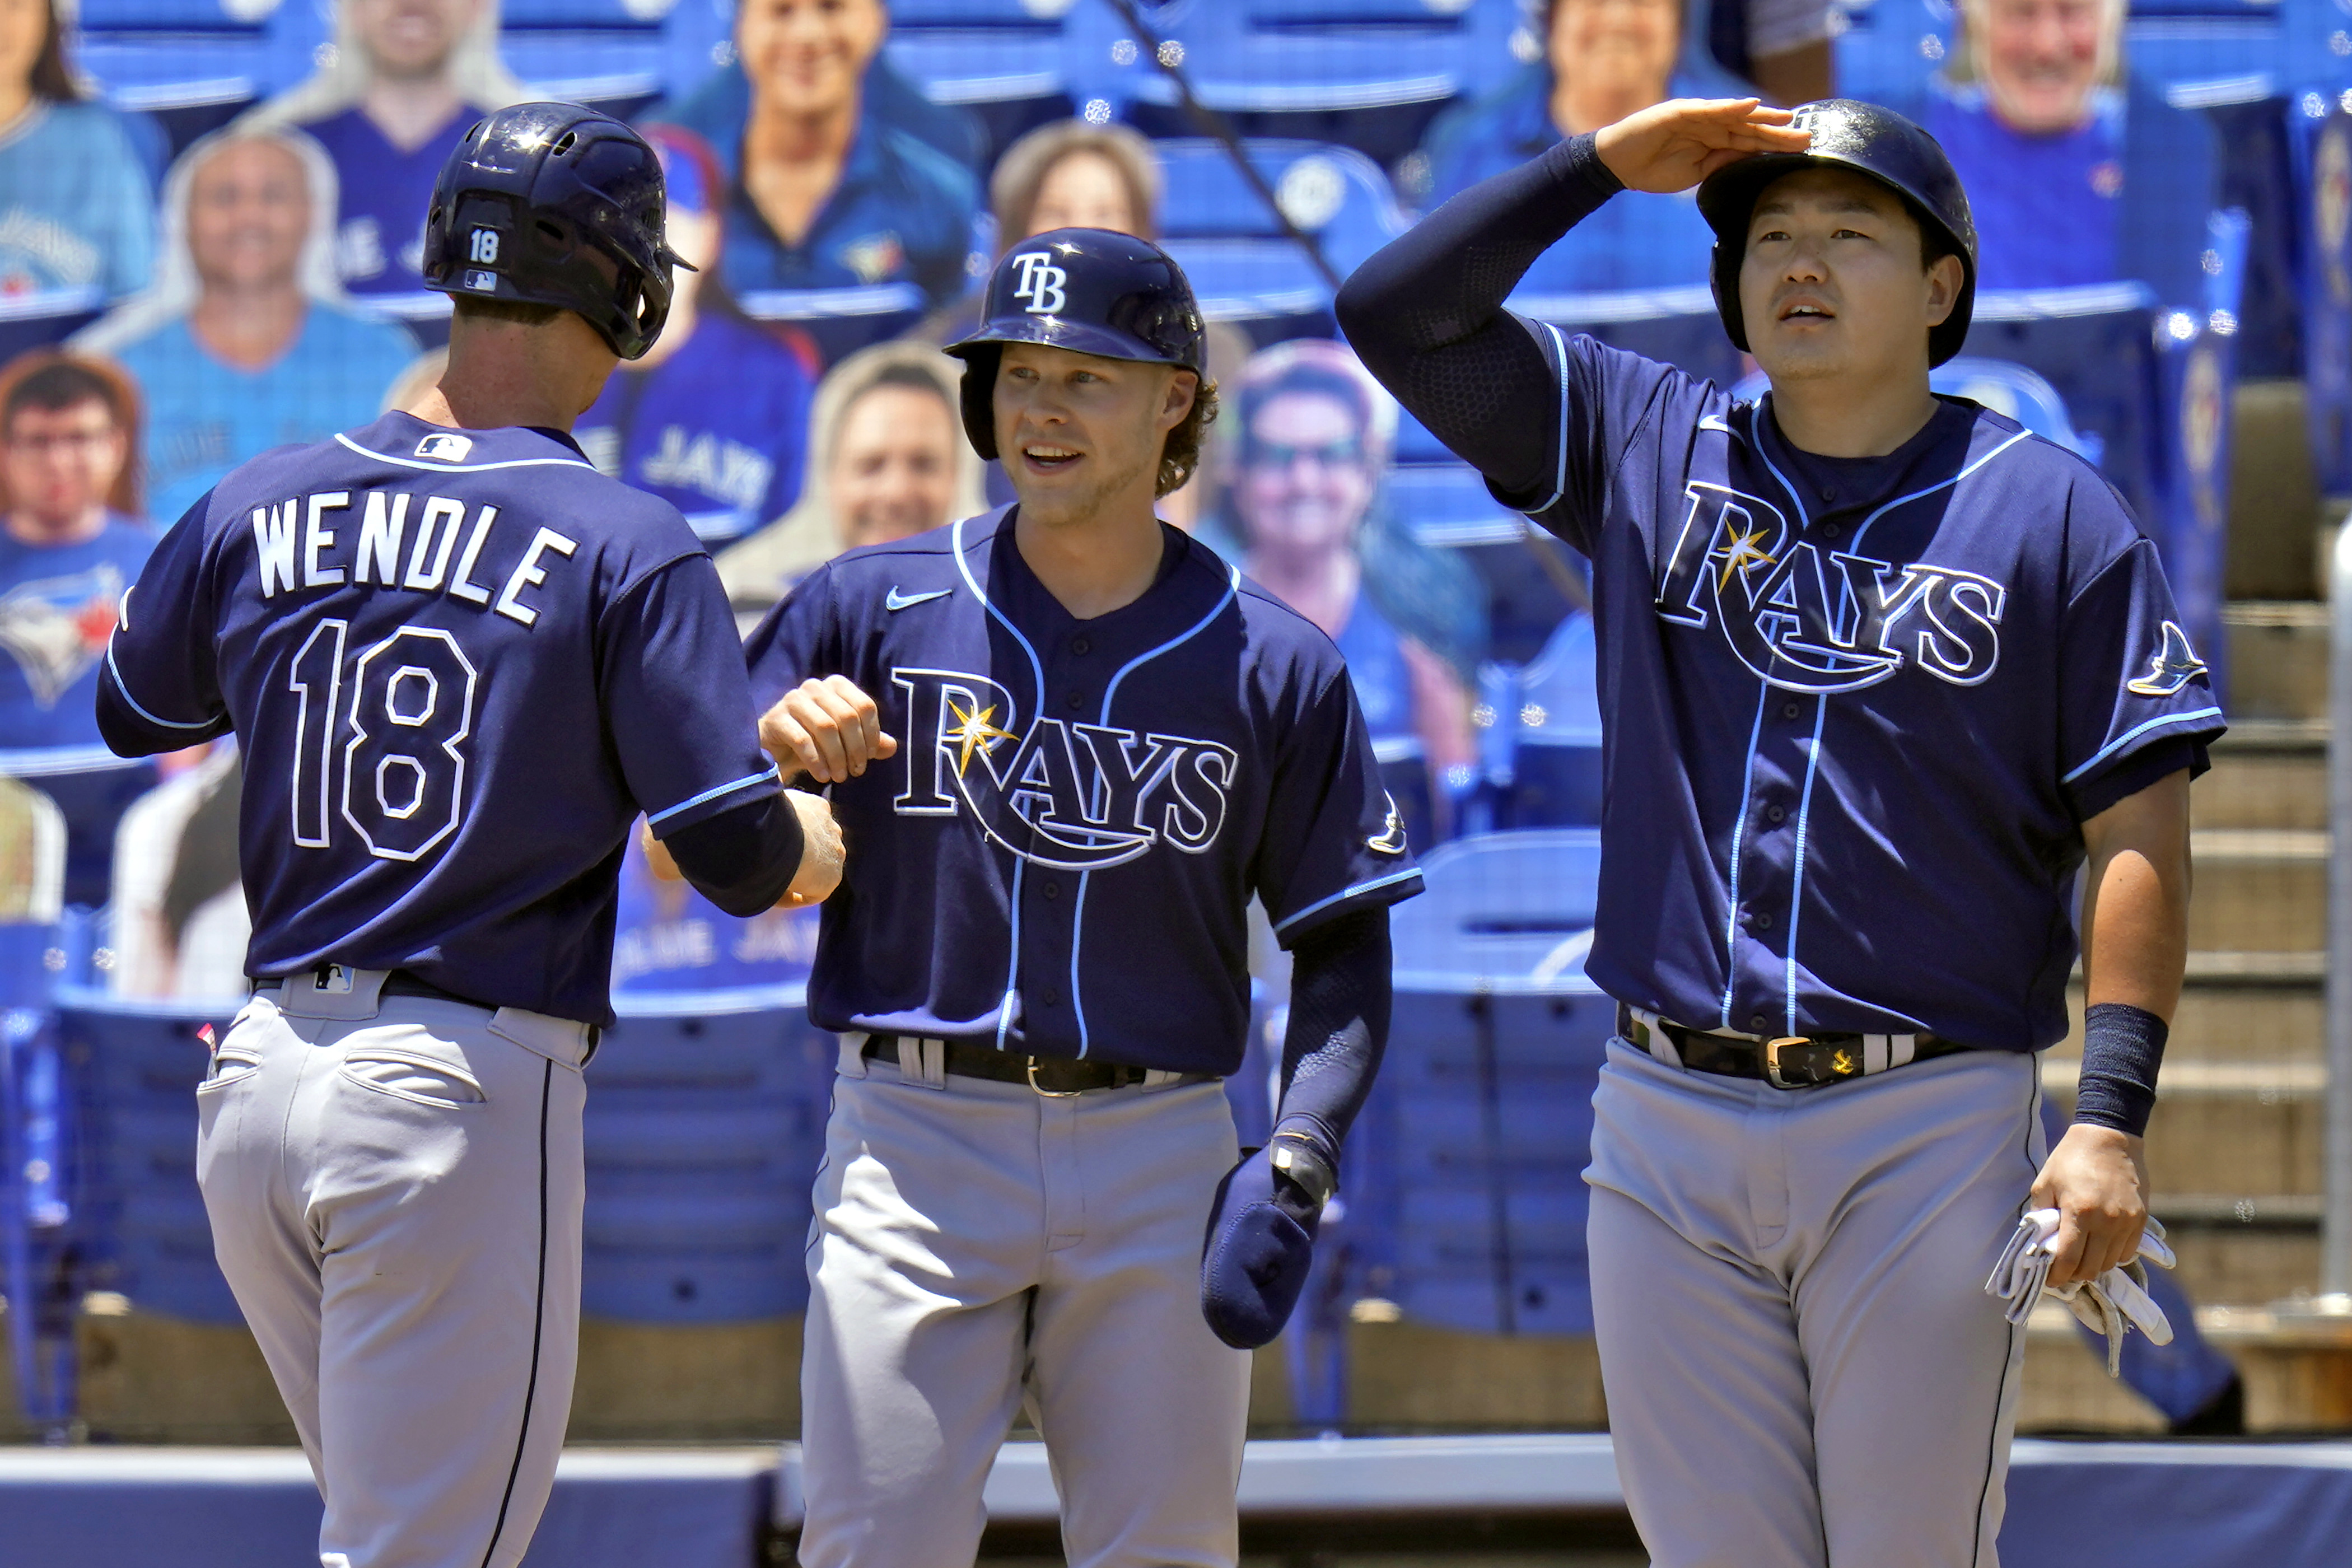 Rays win 11th in row with seven runs in 11th